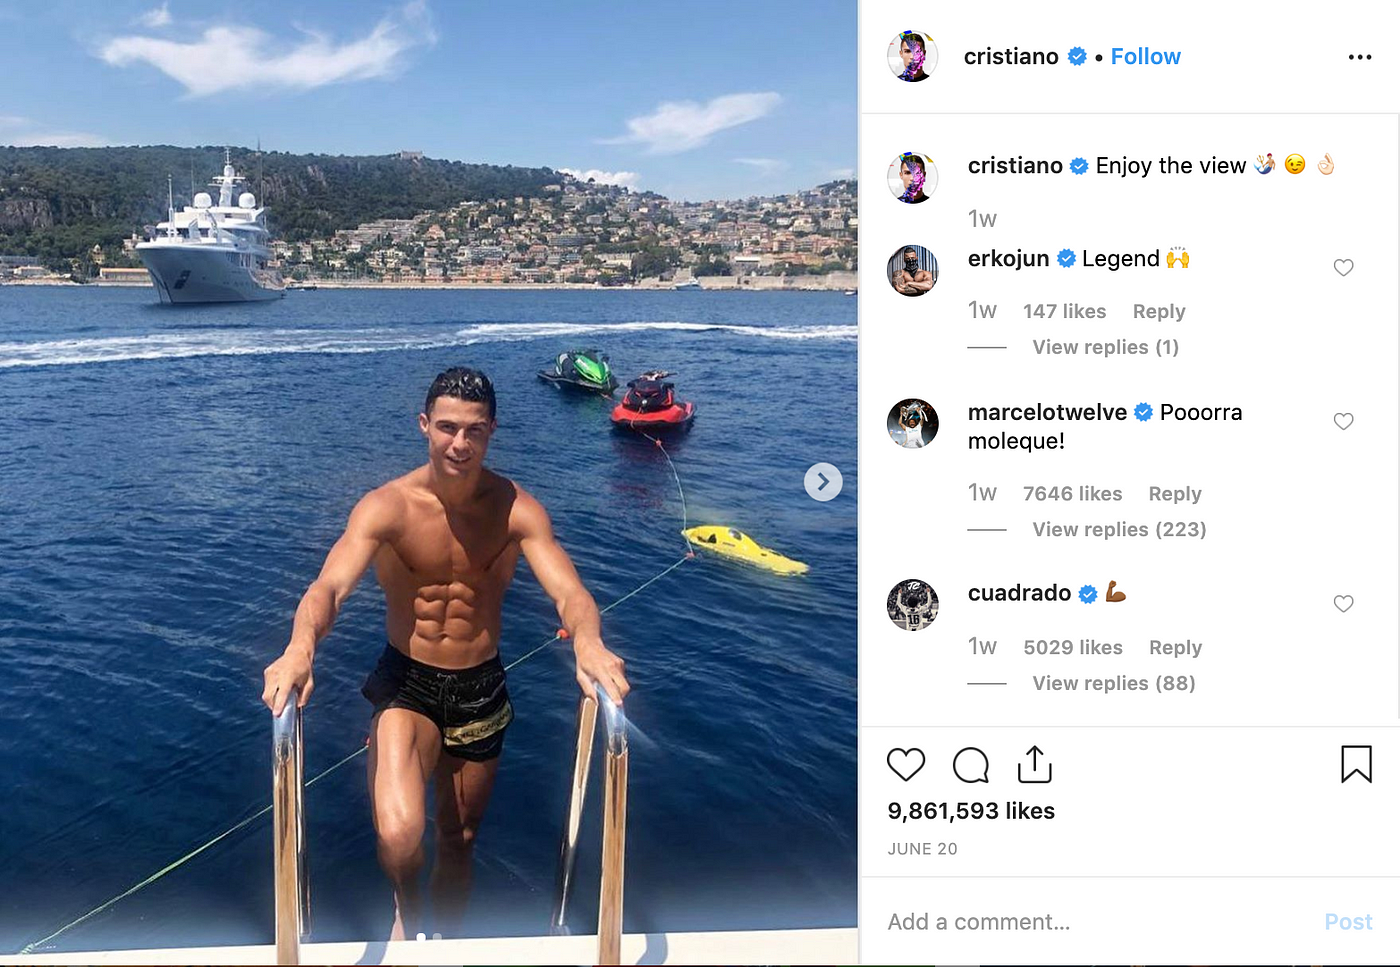 Cristiano Ronaldo's "Enjoy the view" Instagram post received over 9 million likes.